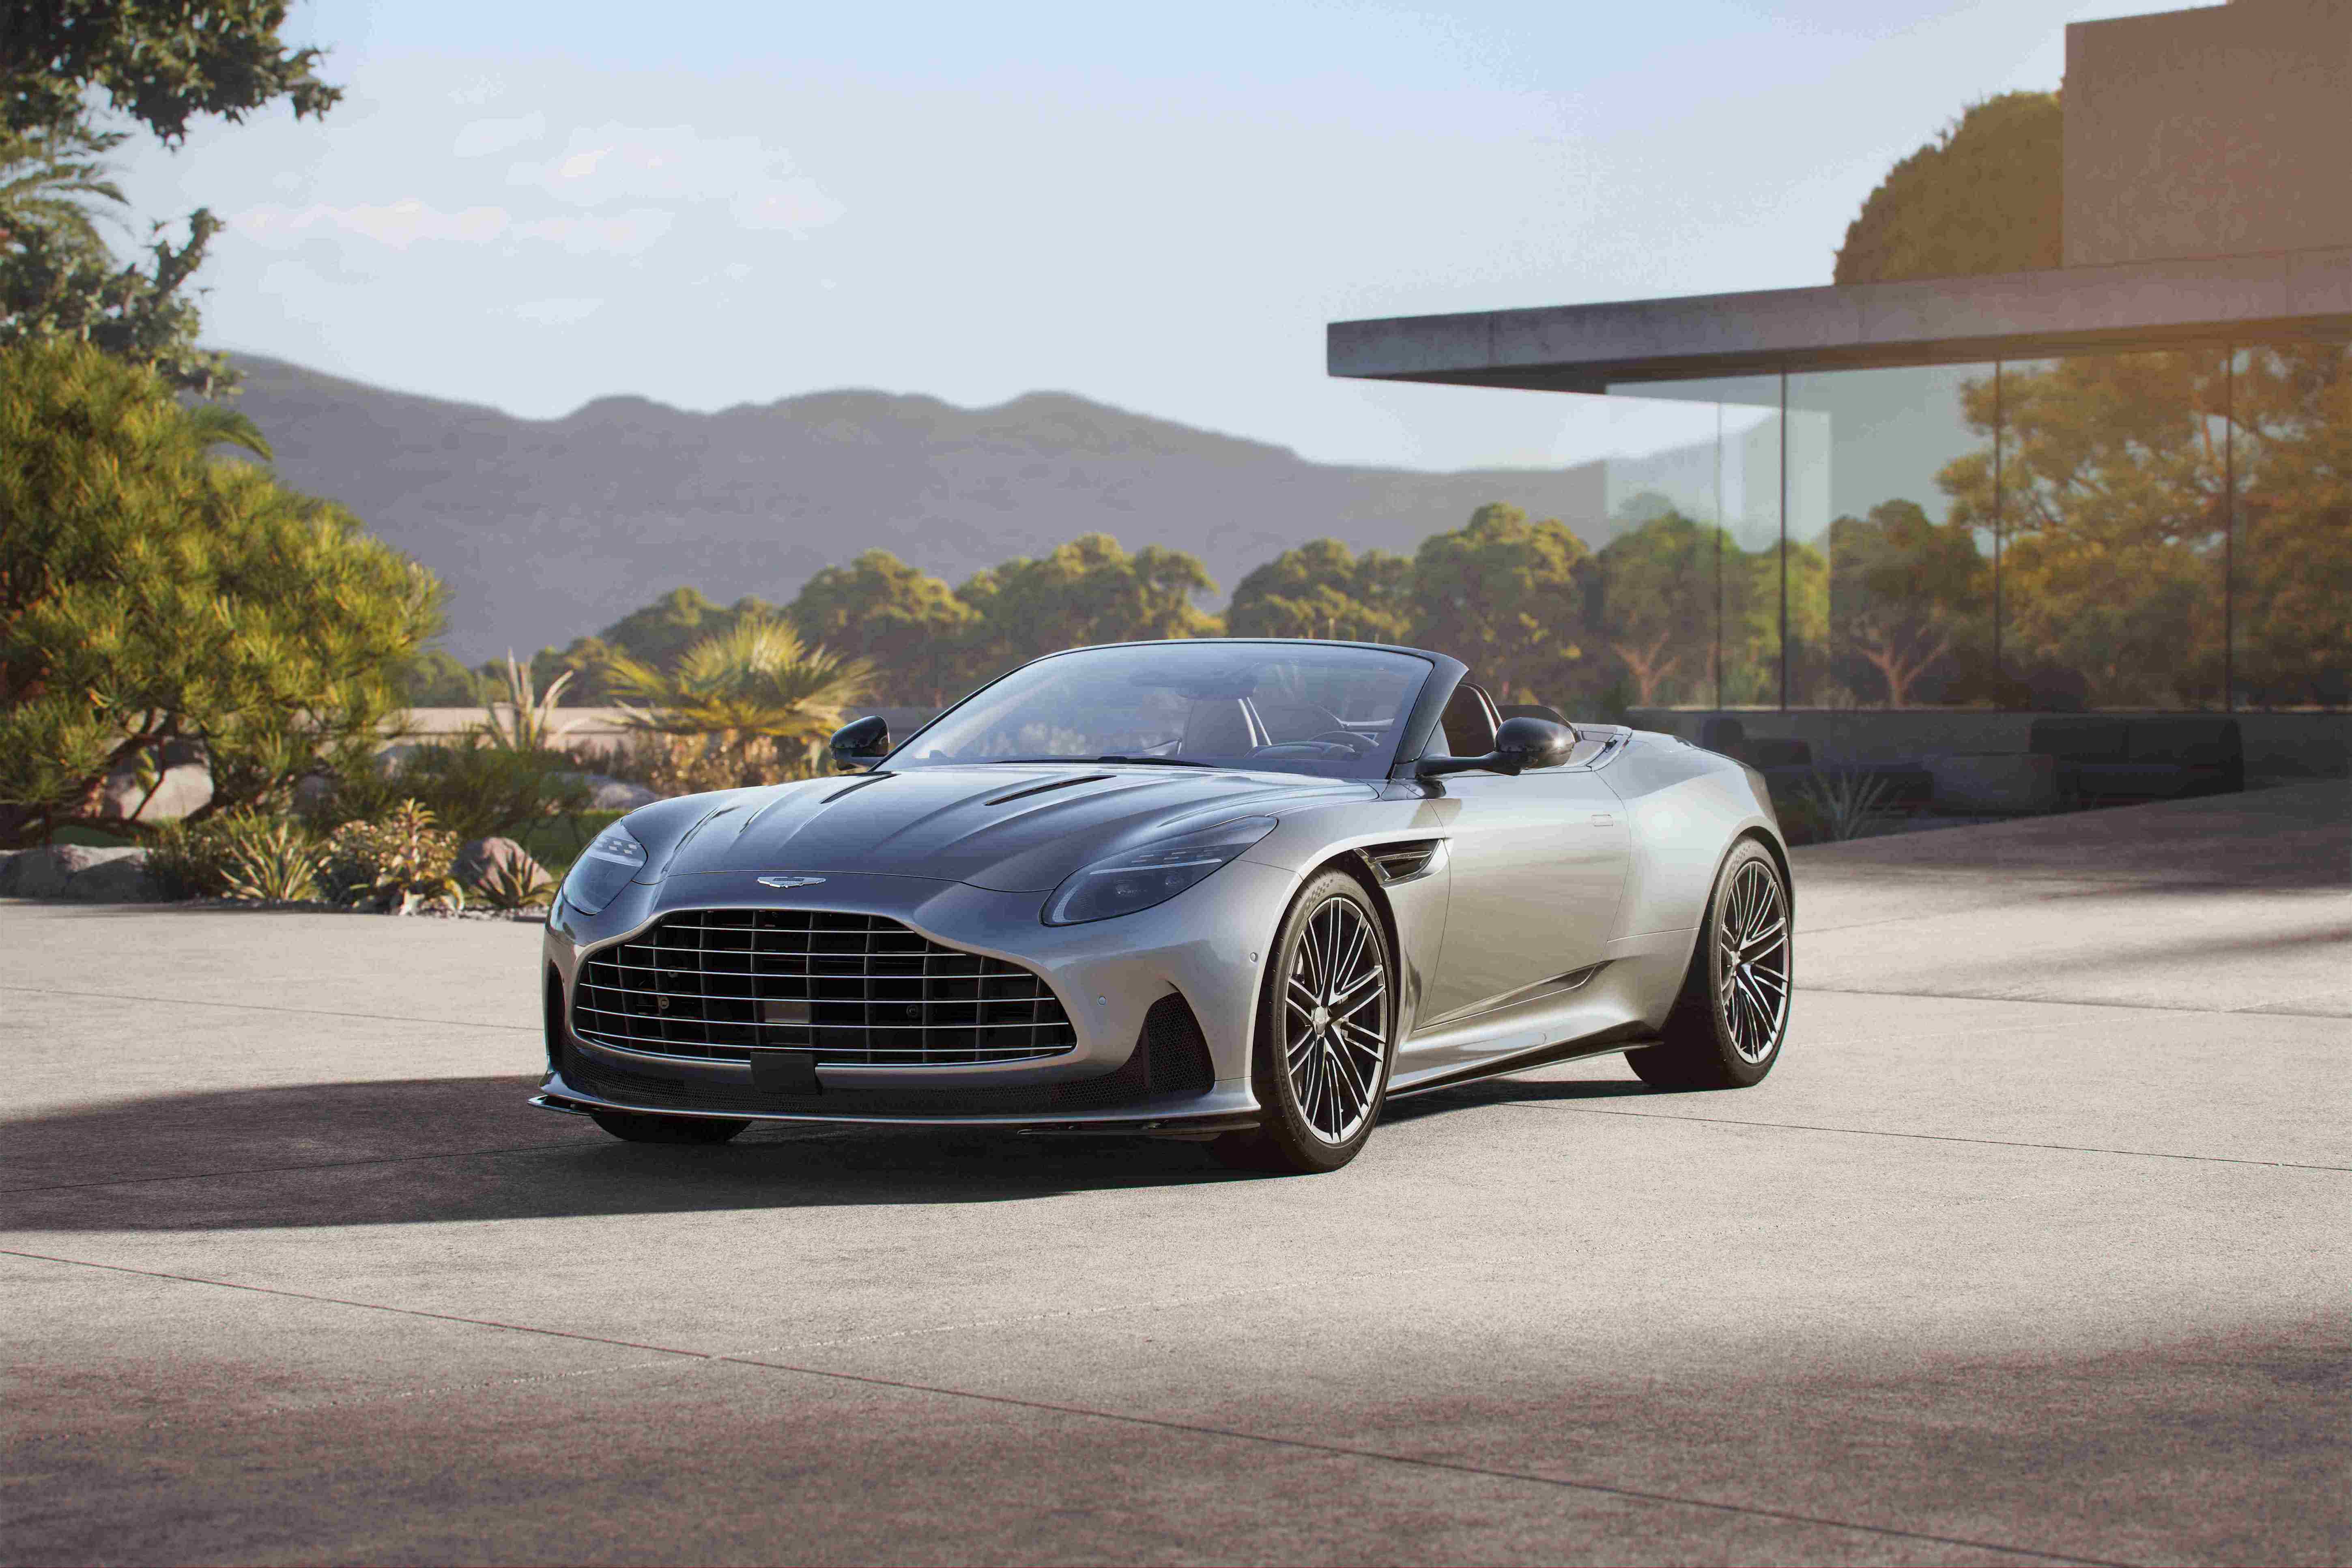 Elevate Your Drive with the New Aston Martin DB12 - Cutting-edge design and thrilling performance in the 2024 release. Find the 2024 DB12 price and engine details.